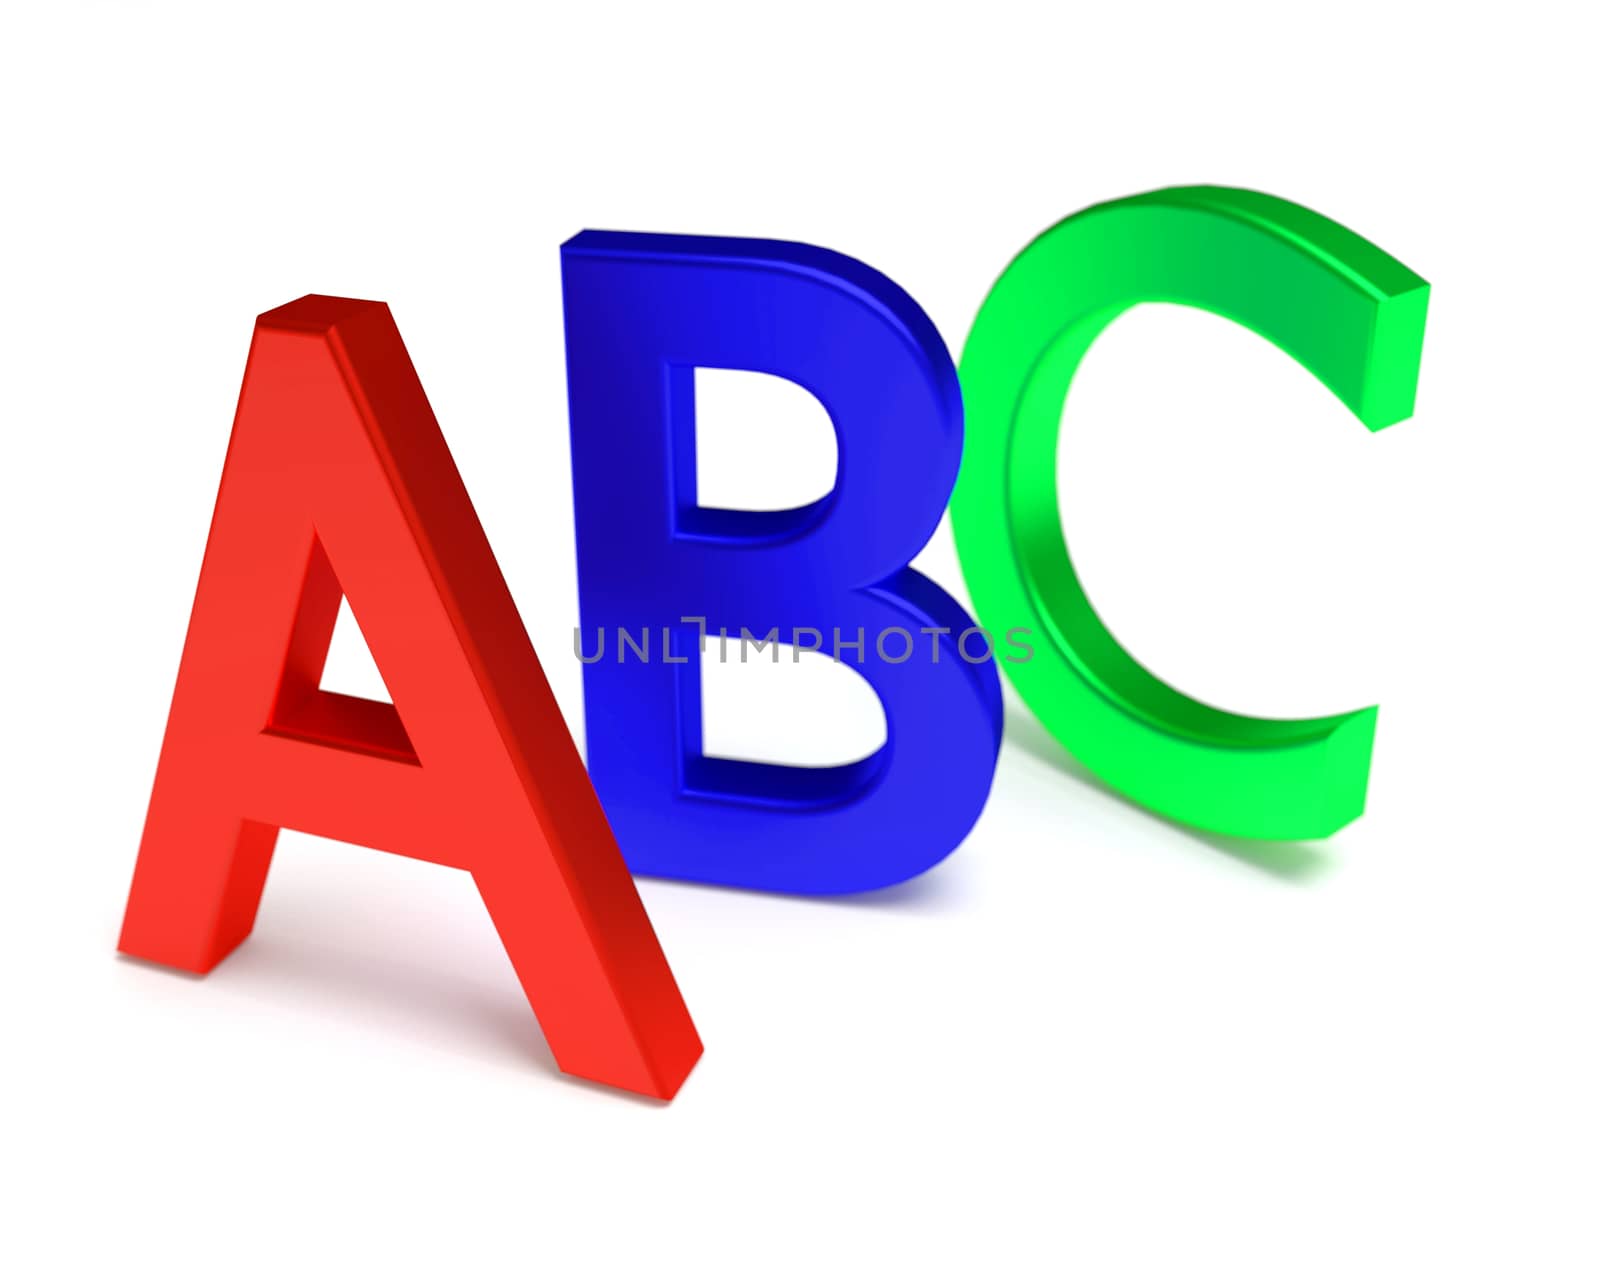 ABC Letters - Image Isolated on the White background.